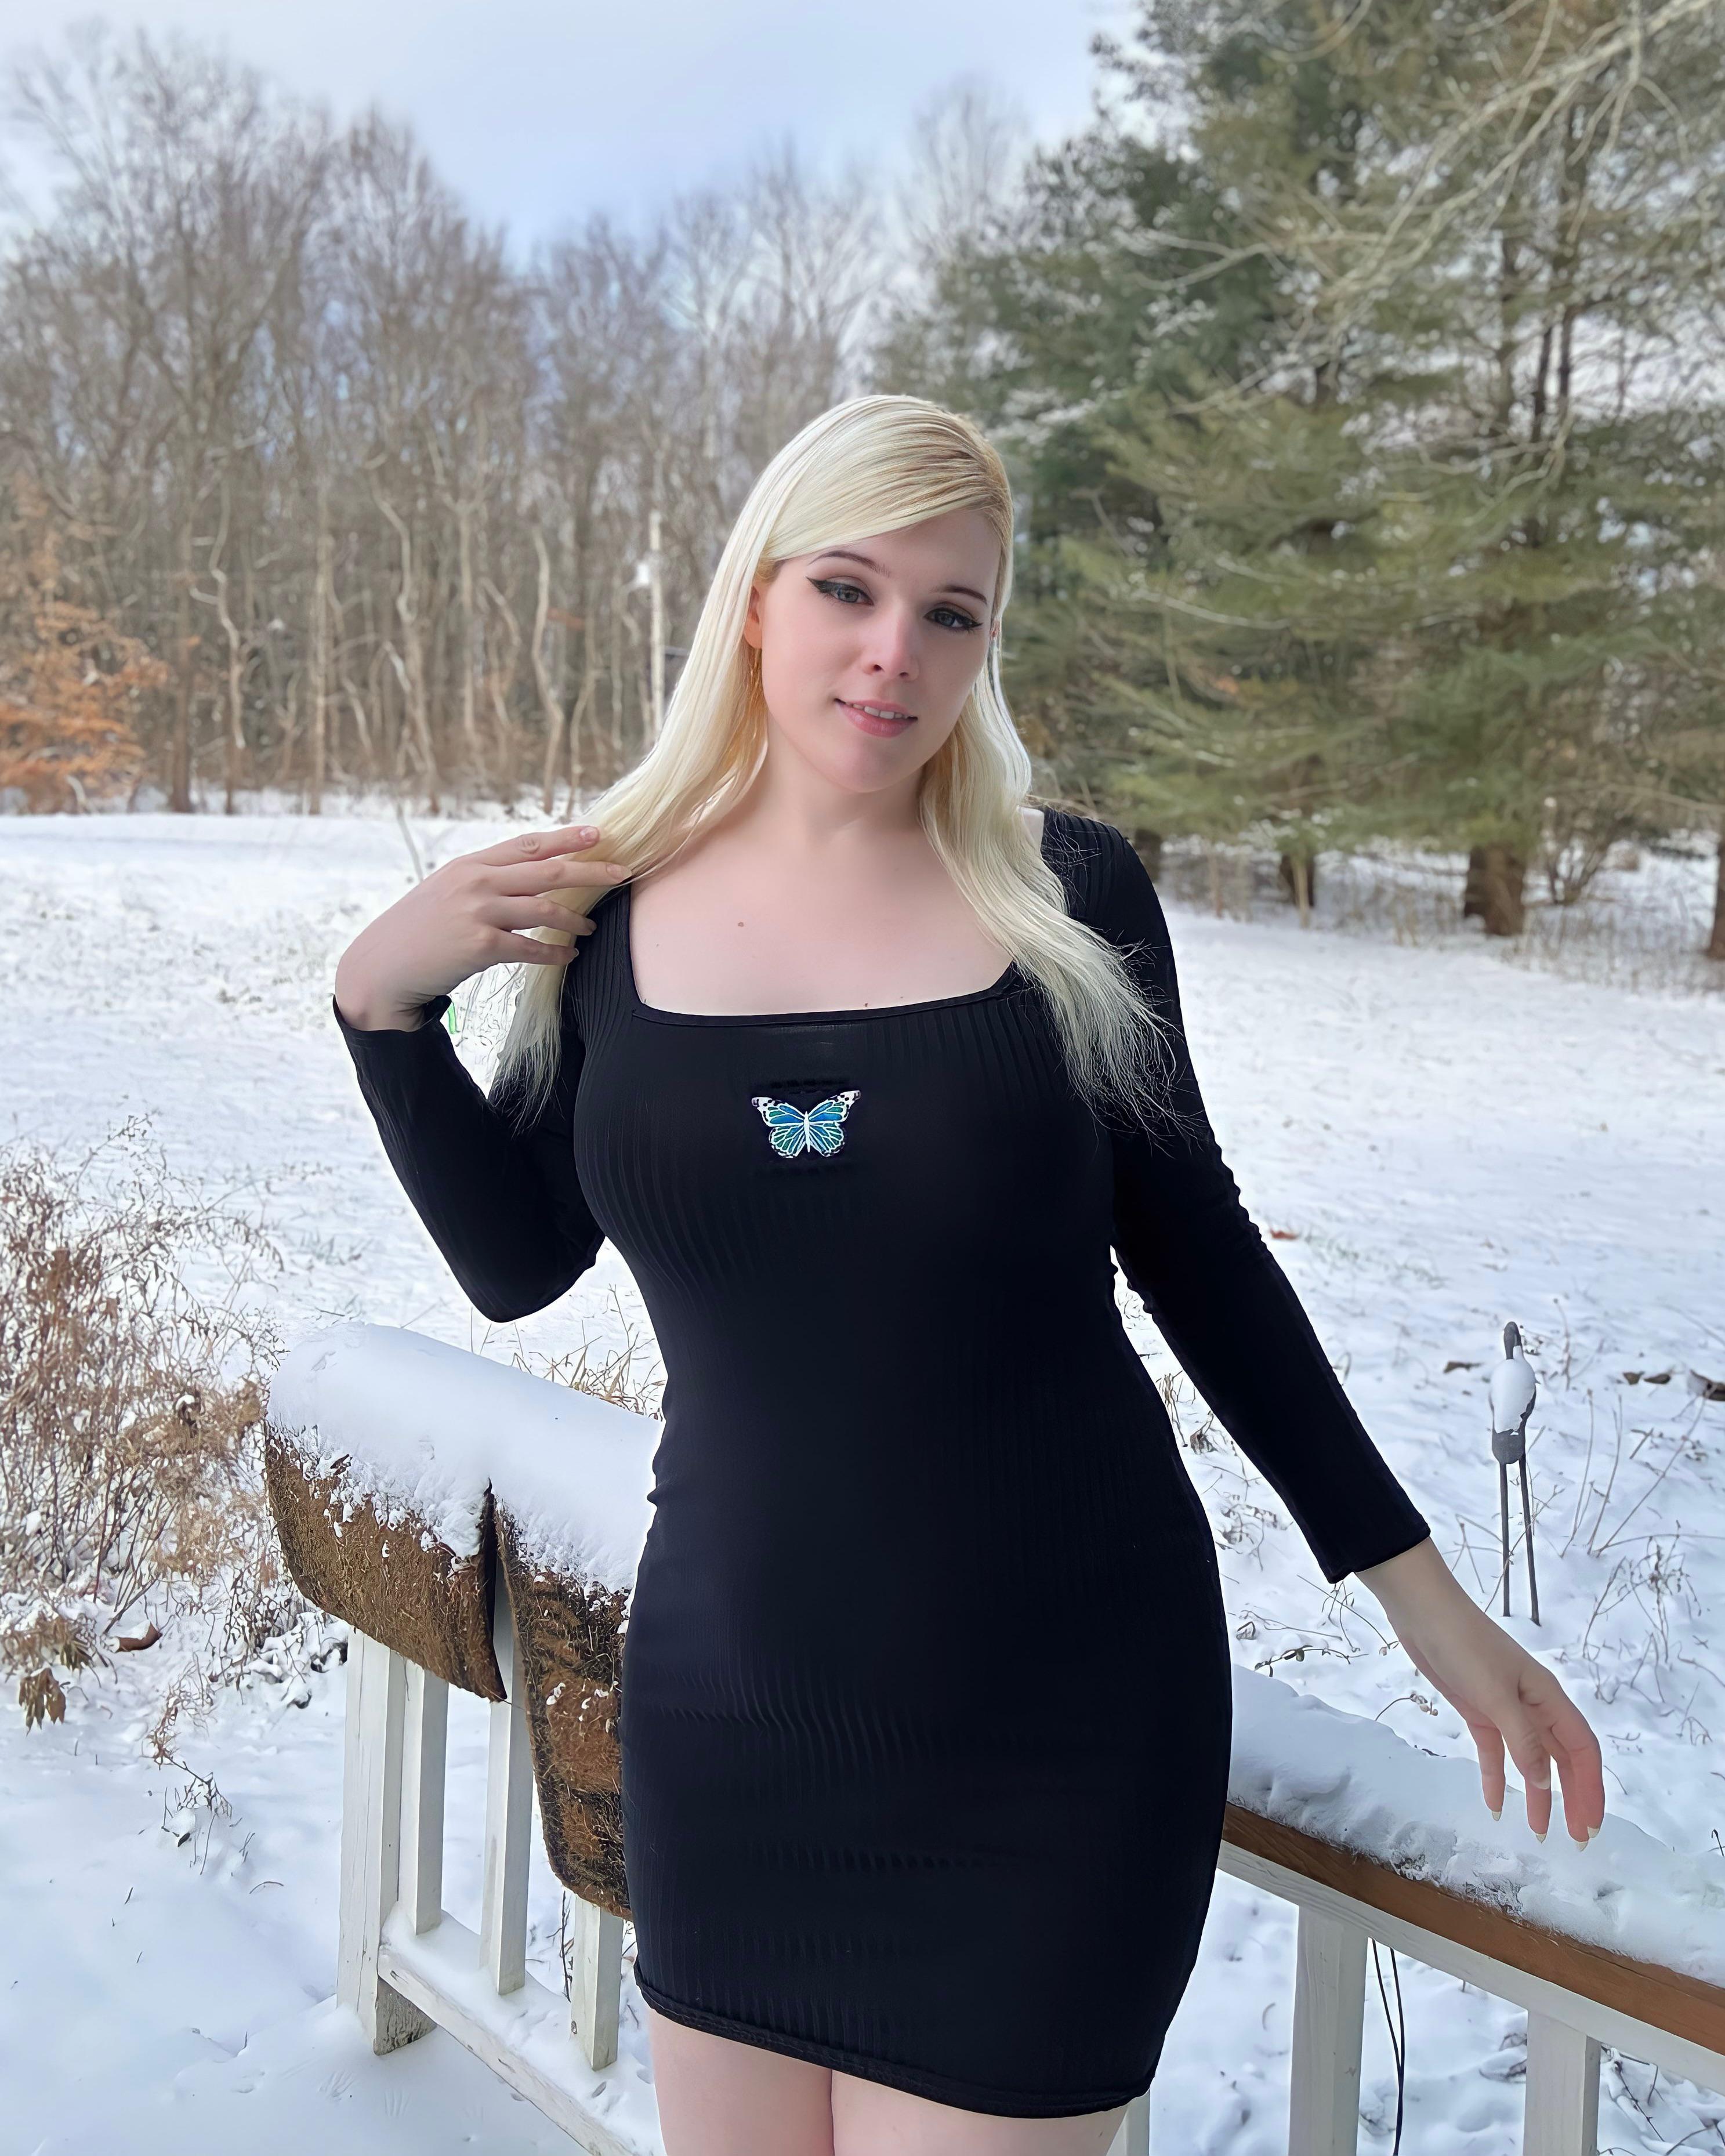 Will anyone play in the snow with me 🥹 10jm437 - transexual woman